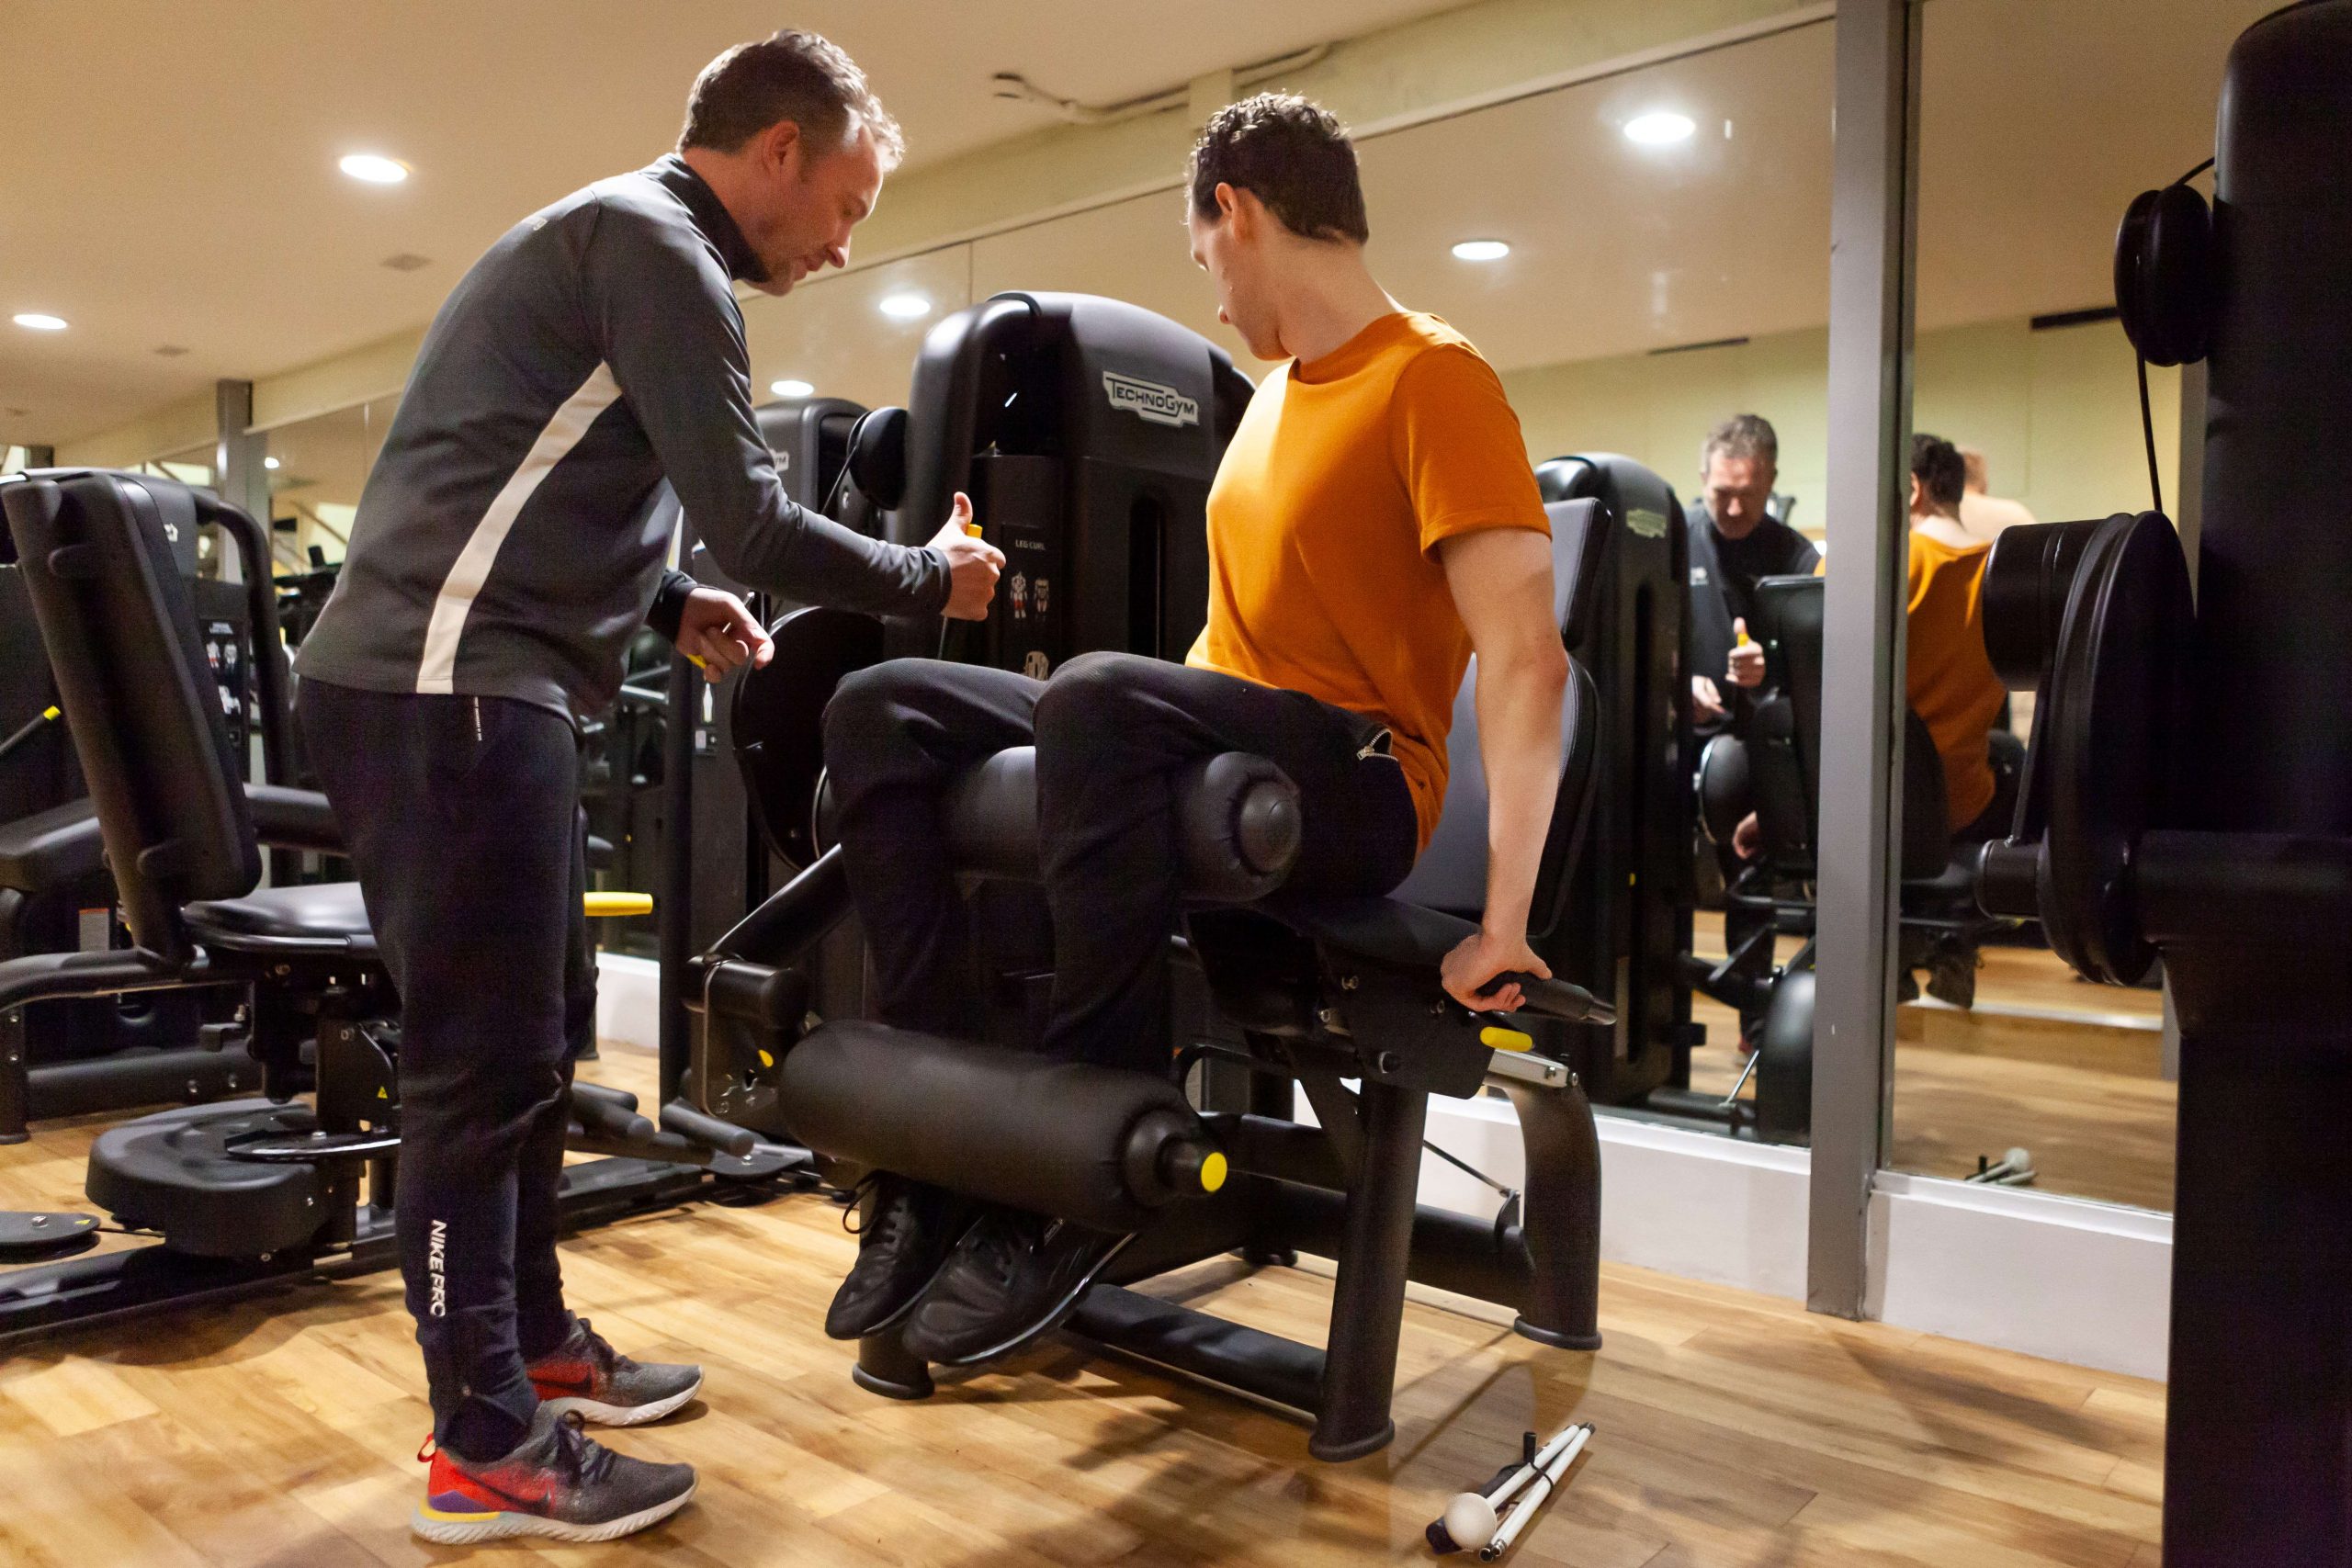 A visually impaired male, sitting on a piece of gym equipment. An instructor is standing with him, showing him how to use the equipment.